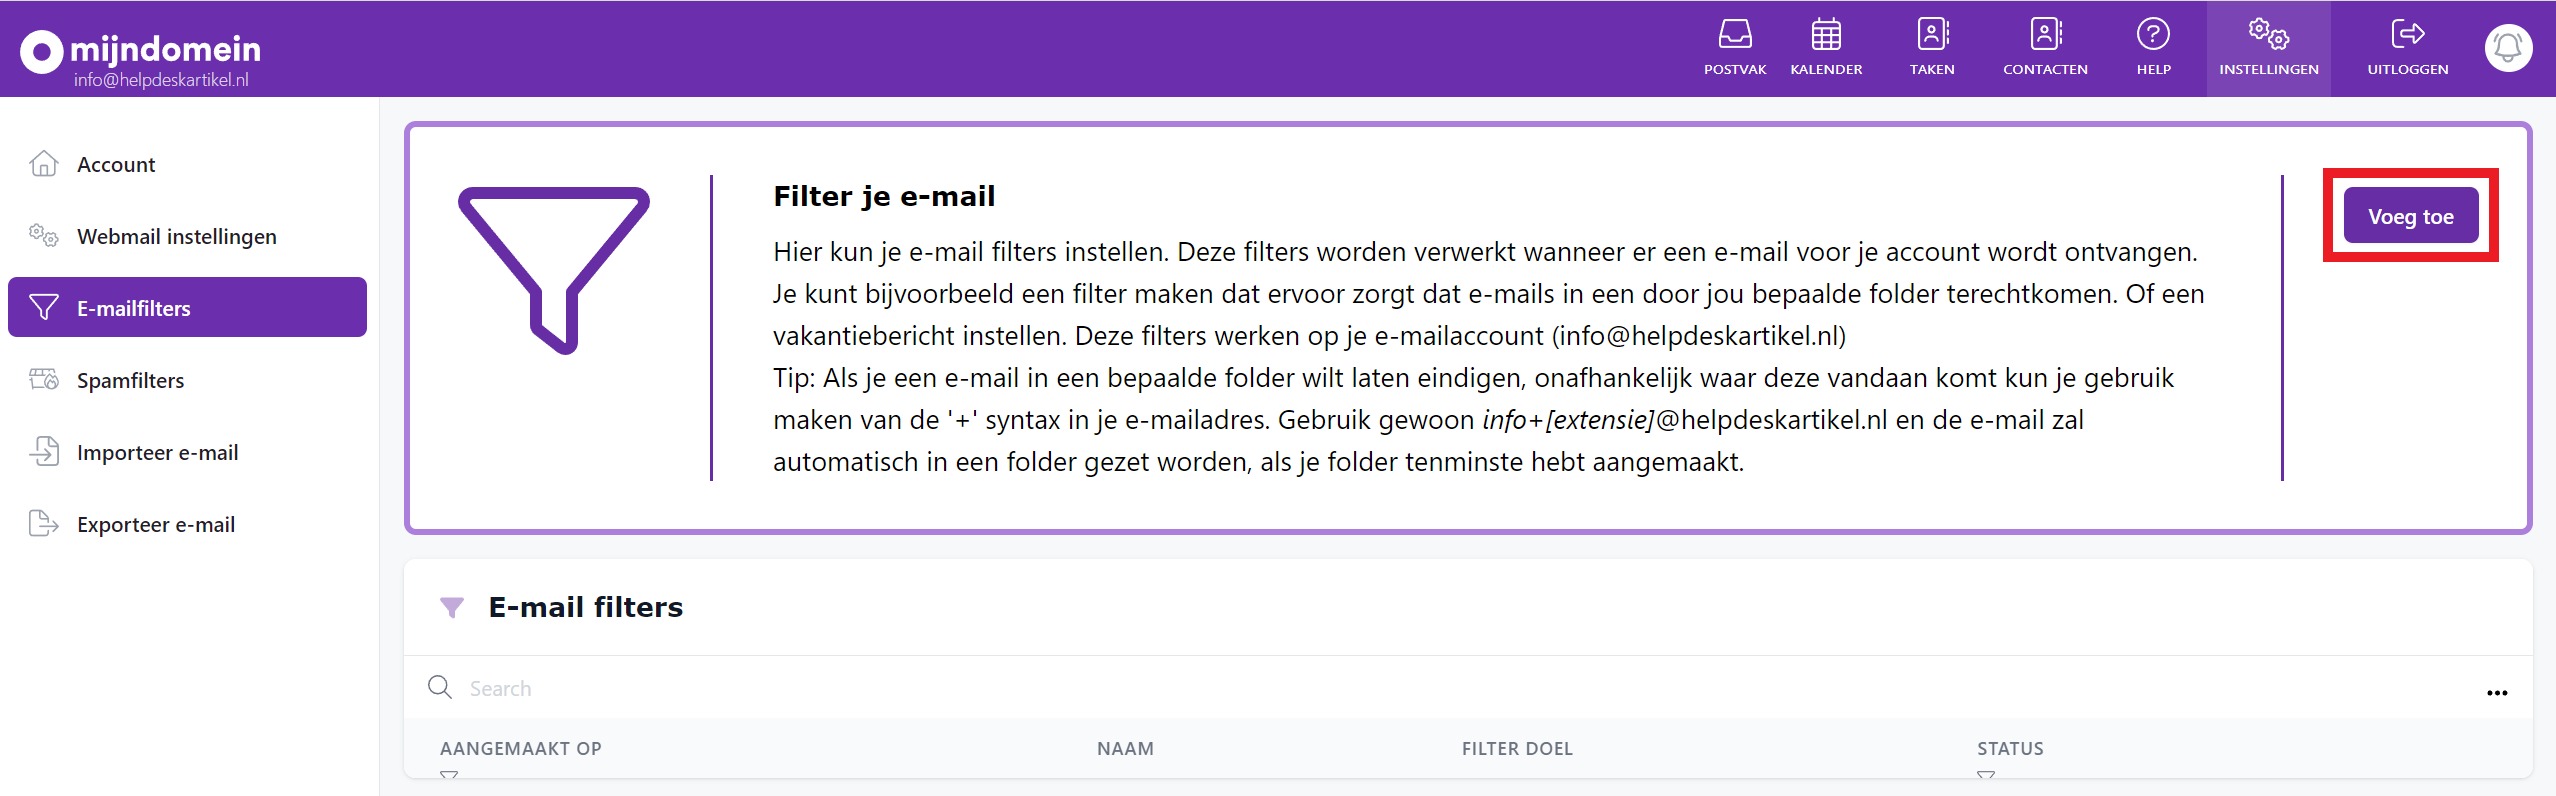 Mijndomein e-mailfilters - voeg toe.png